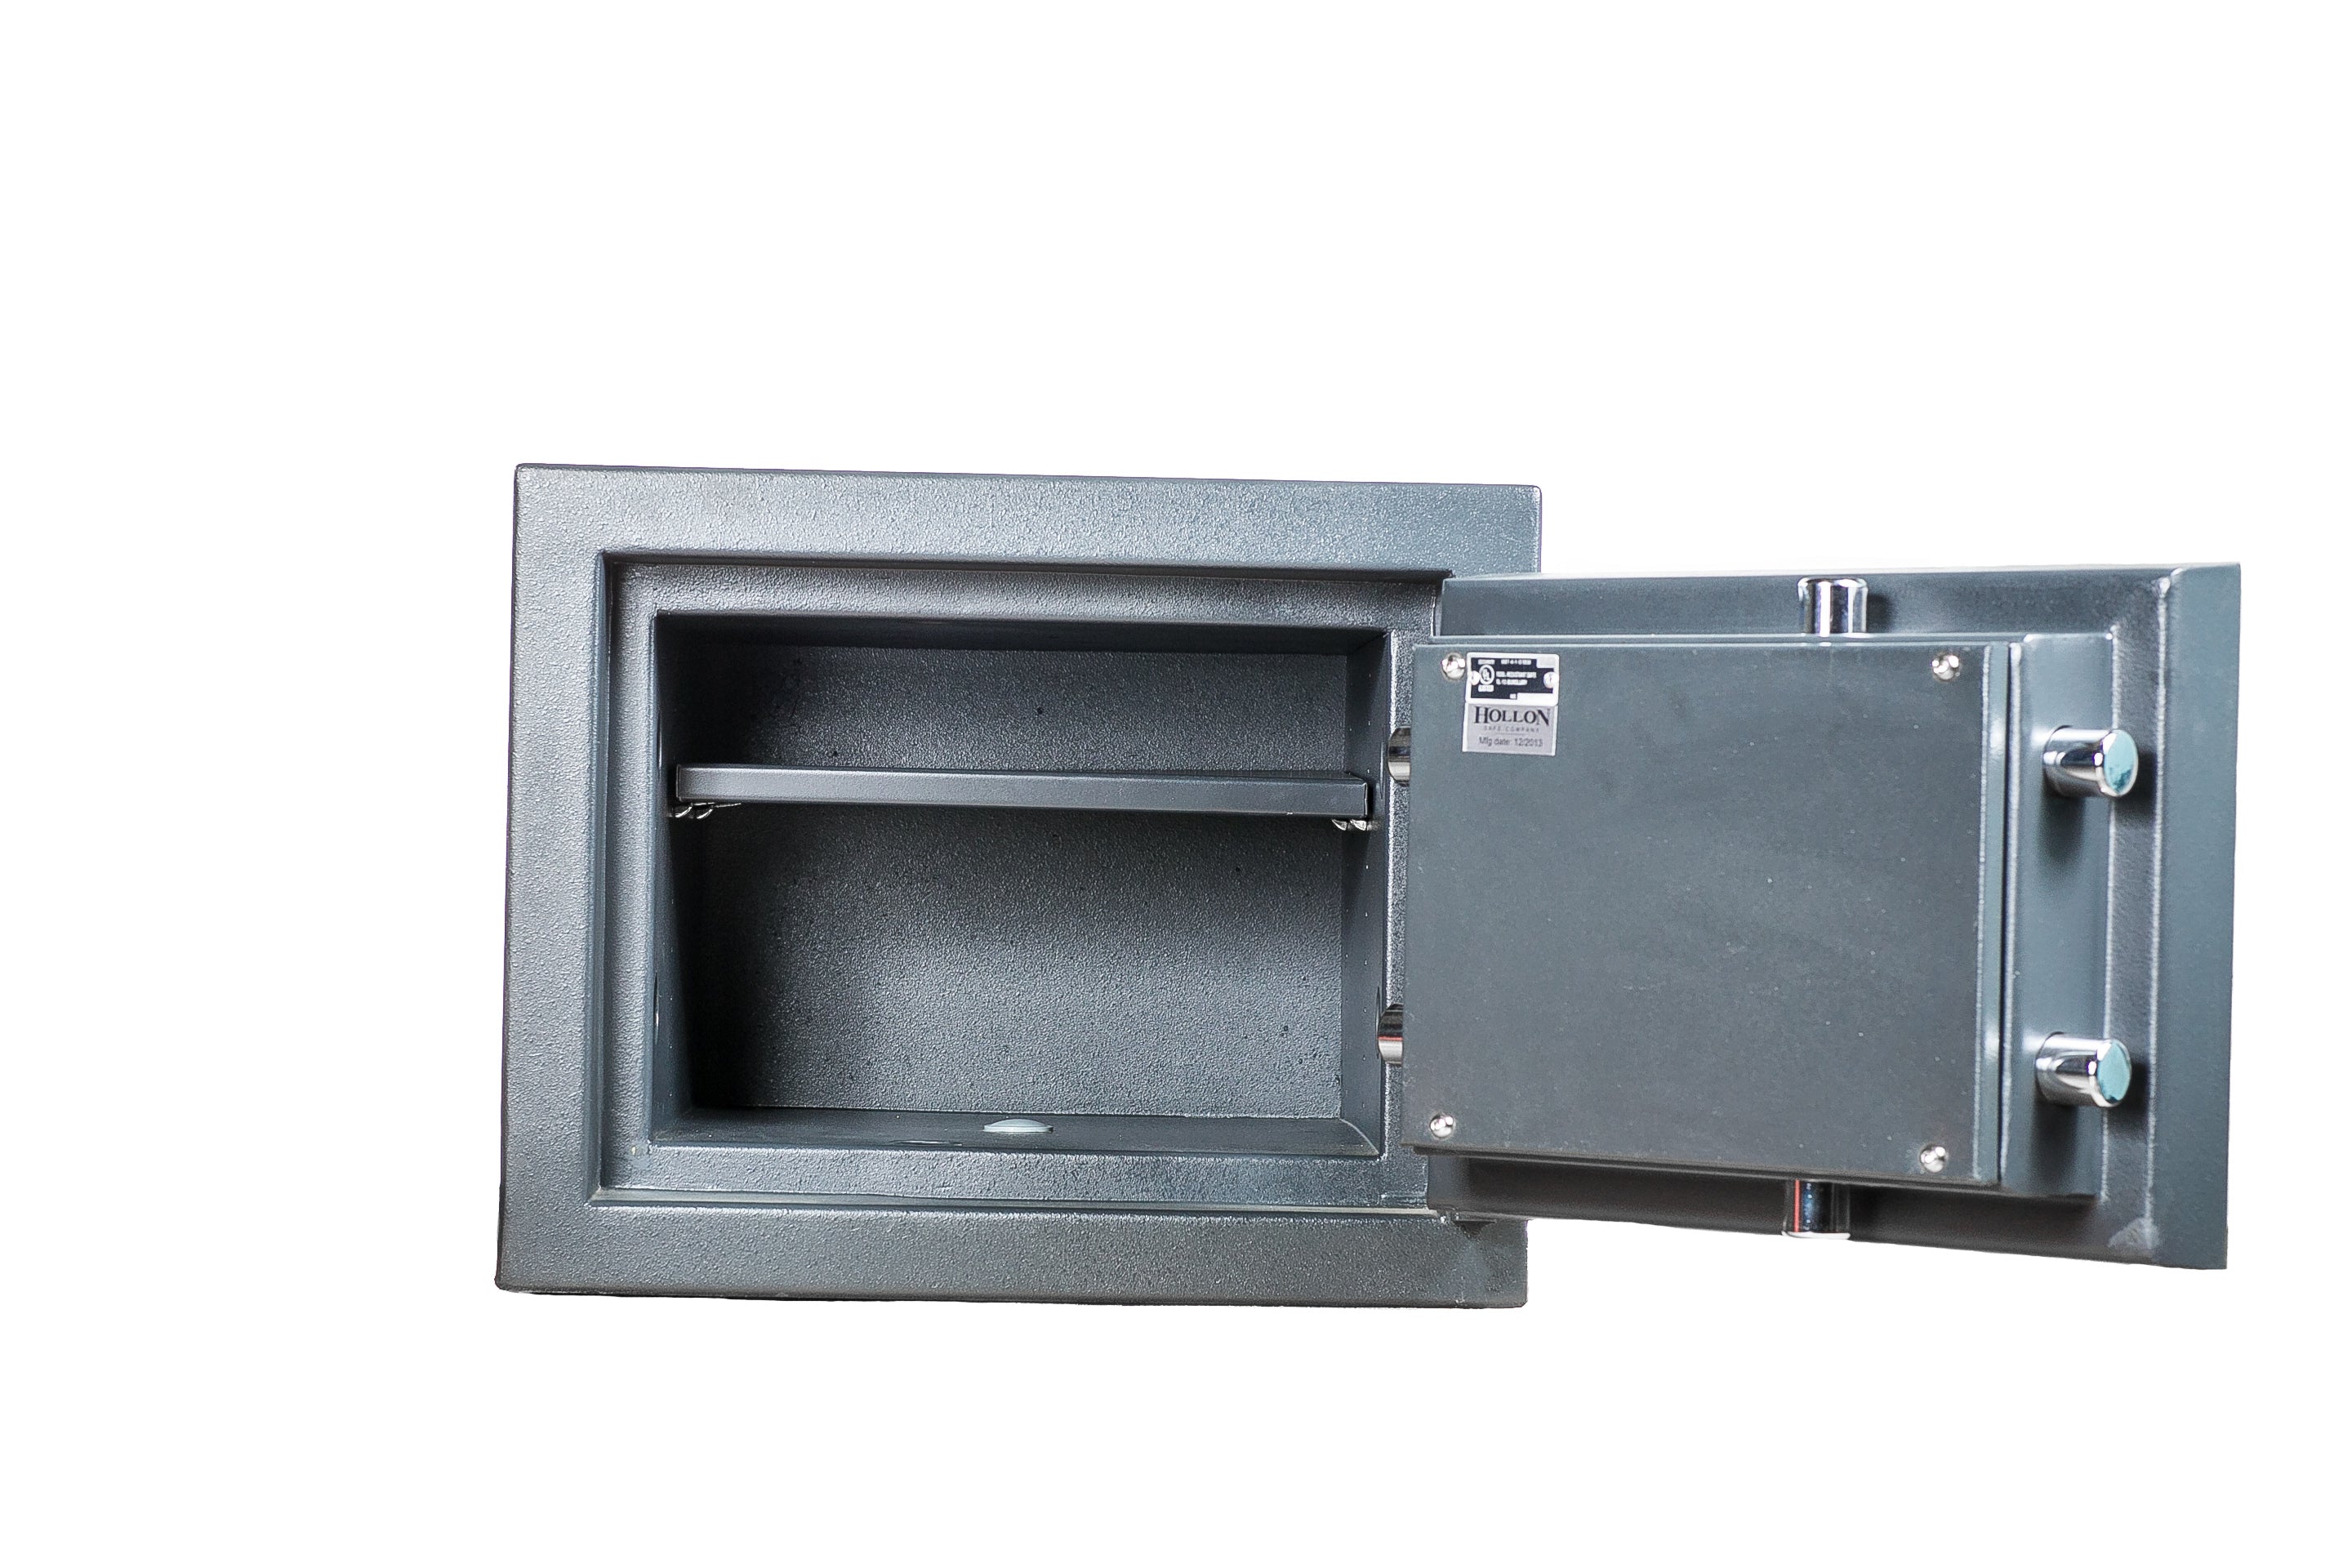 TL-15 Rated Safe - PM-1014E - Security Safes